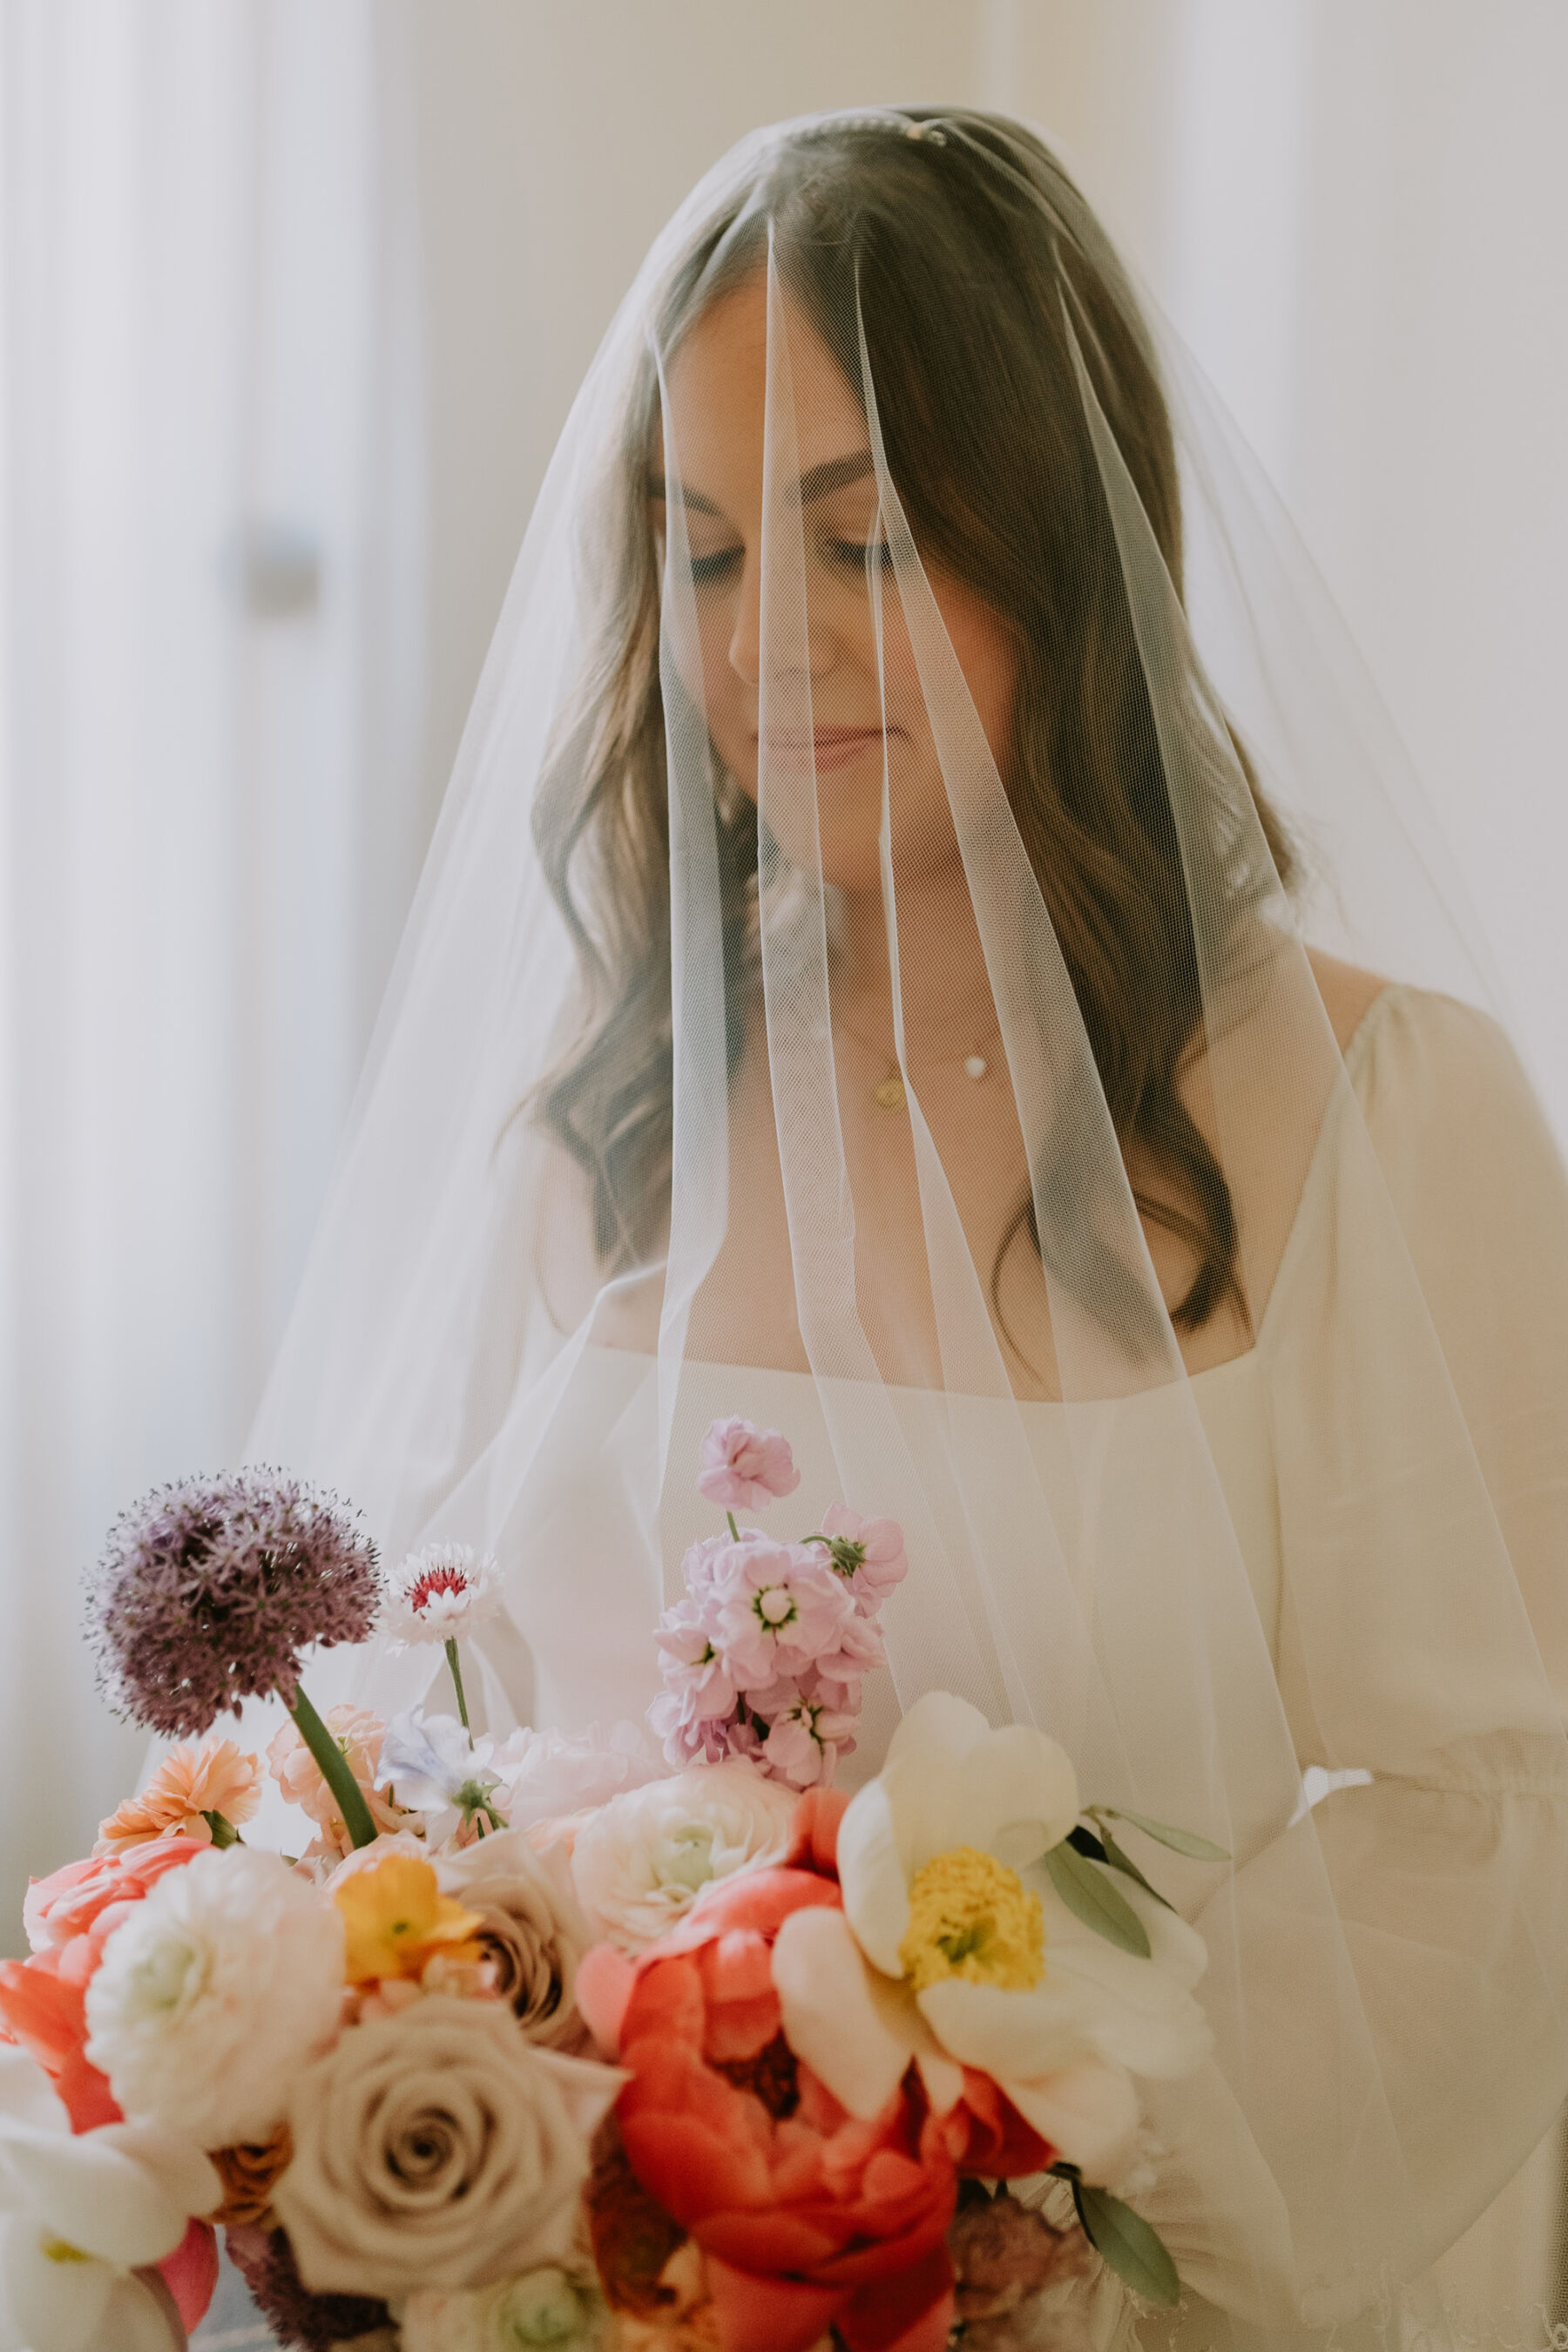 Portrait shot of bride wearing blusher veil and carrying a colourful bouquet. 